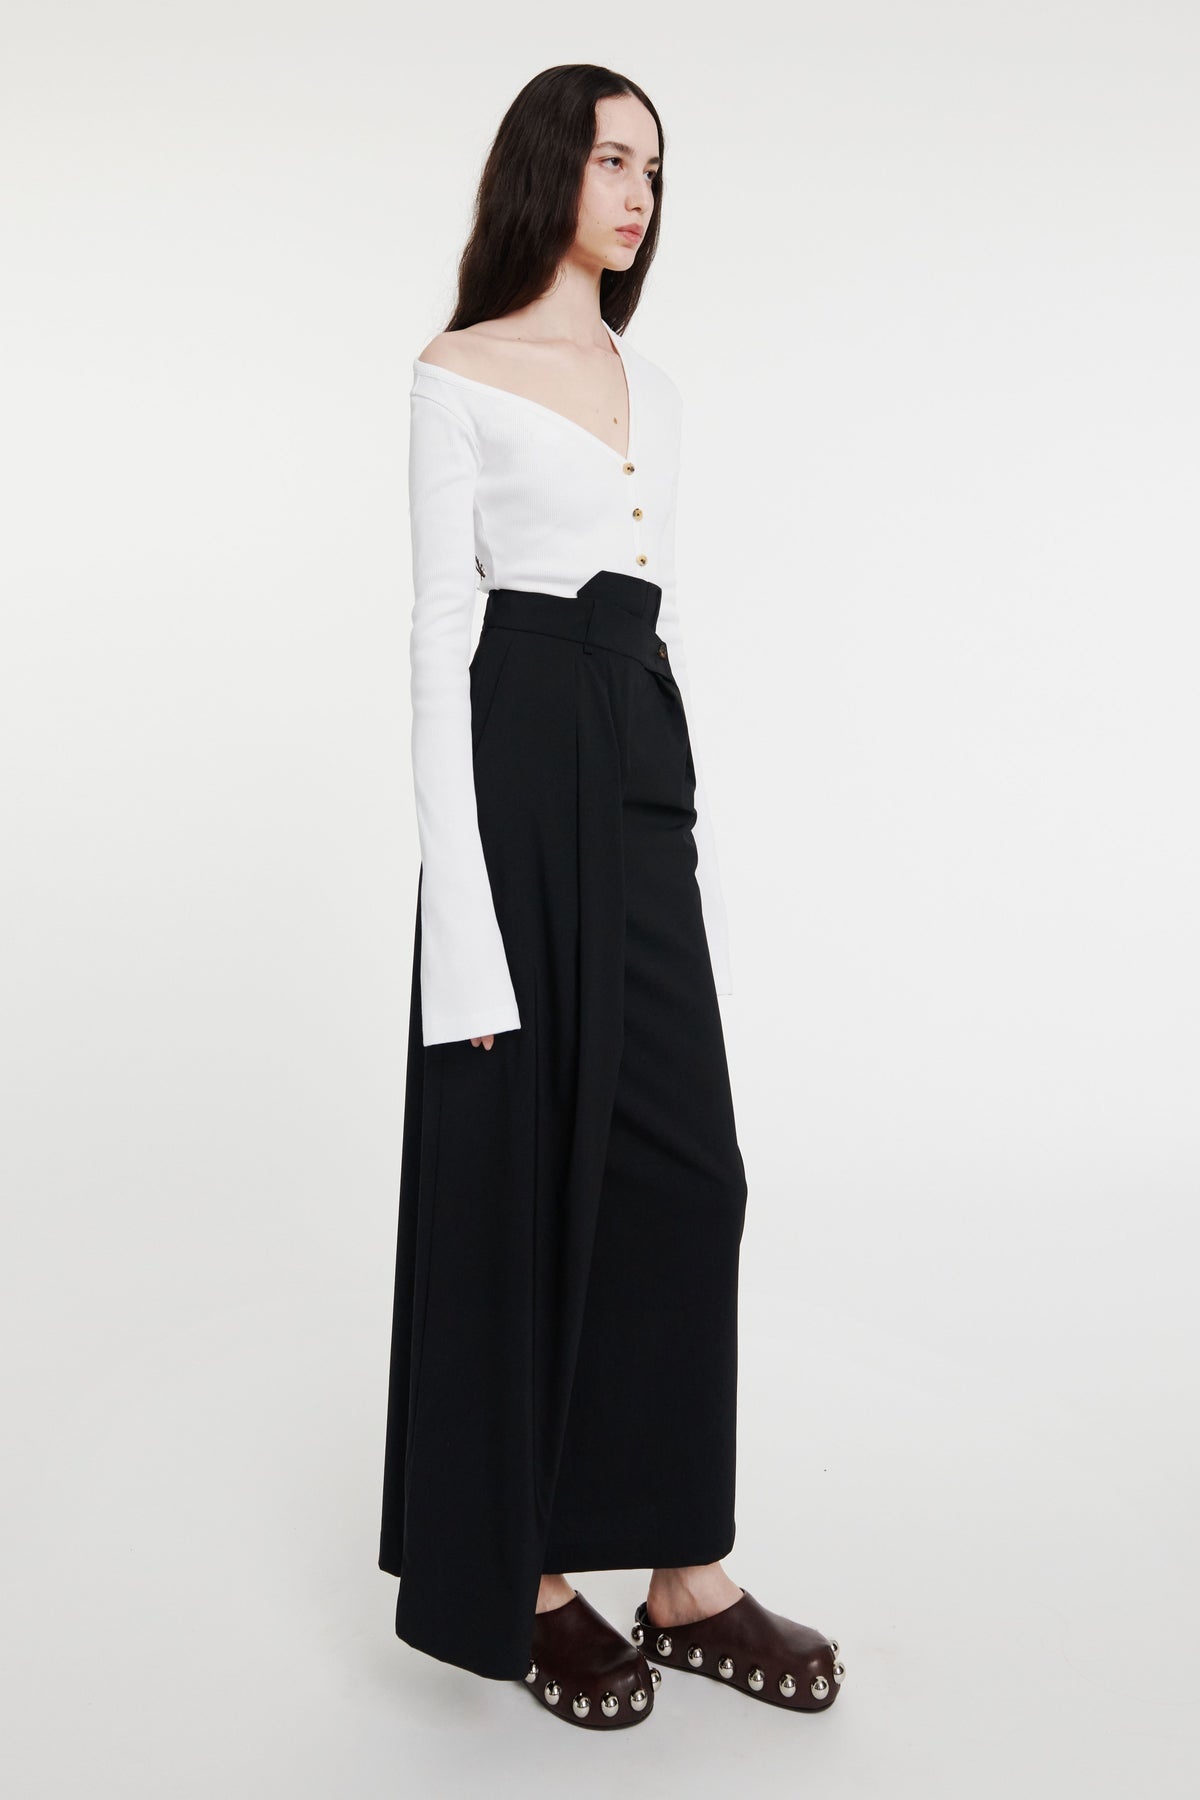 DECONSTRUCTED TROUSERS SKIRT BLACK - 7